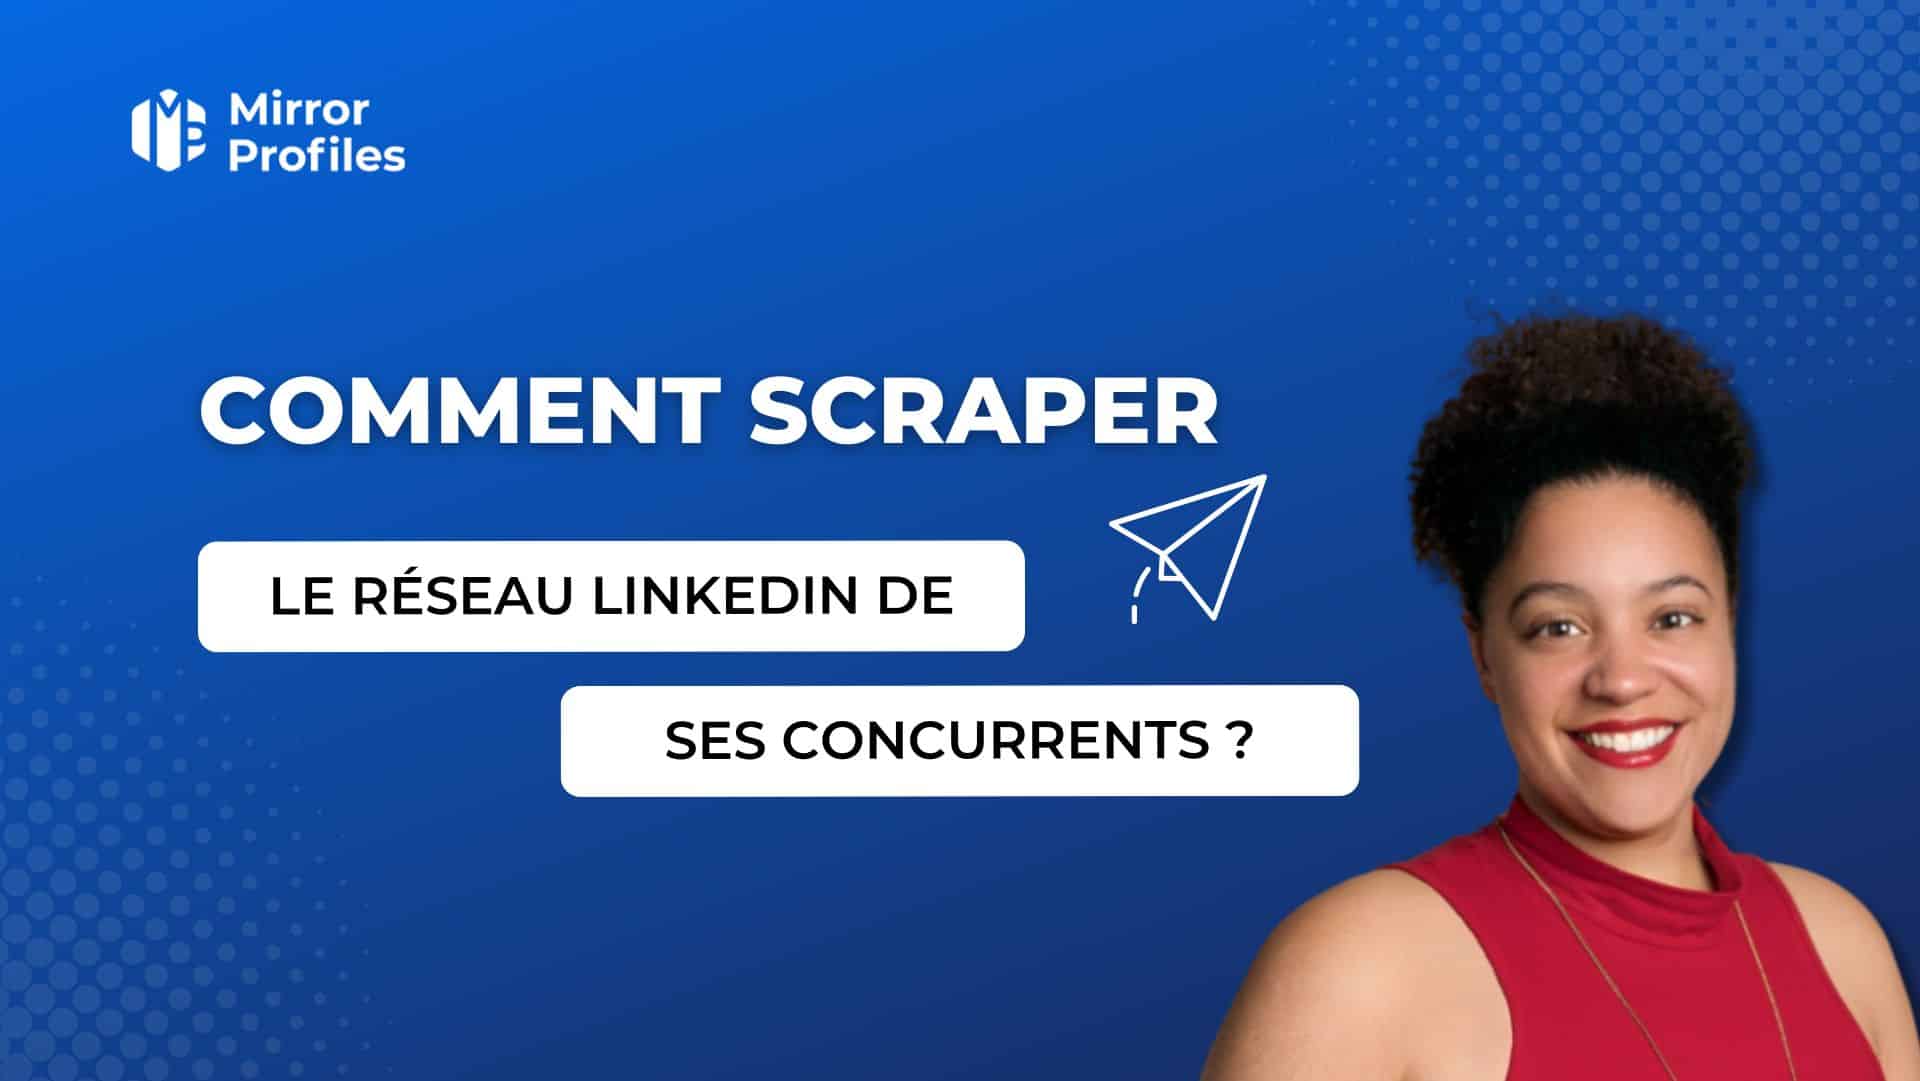 A promotional graphic for Mirror Profiles featuring a woman in a red top smiling, with the text: "How to scrape competitors' LinkedIn networks?